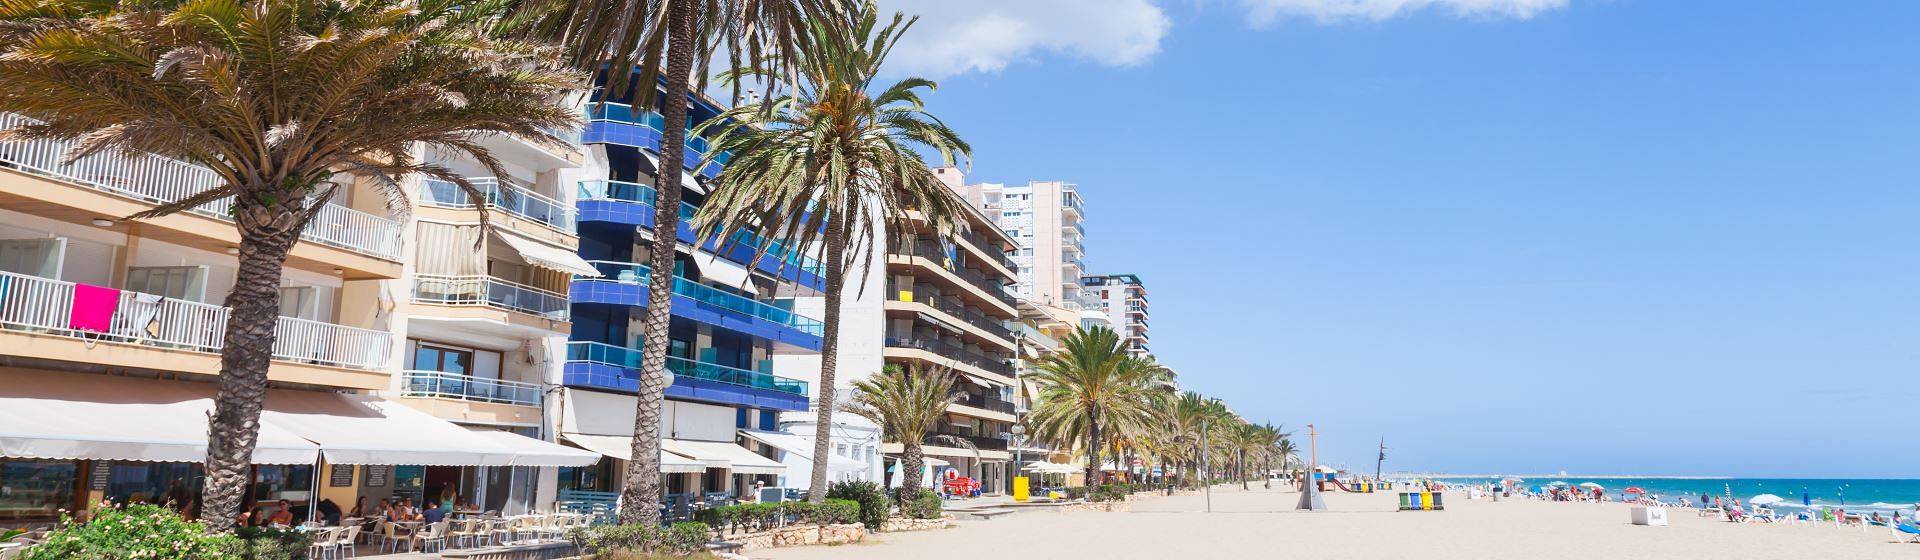 Holidays to Calafell Image